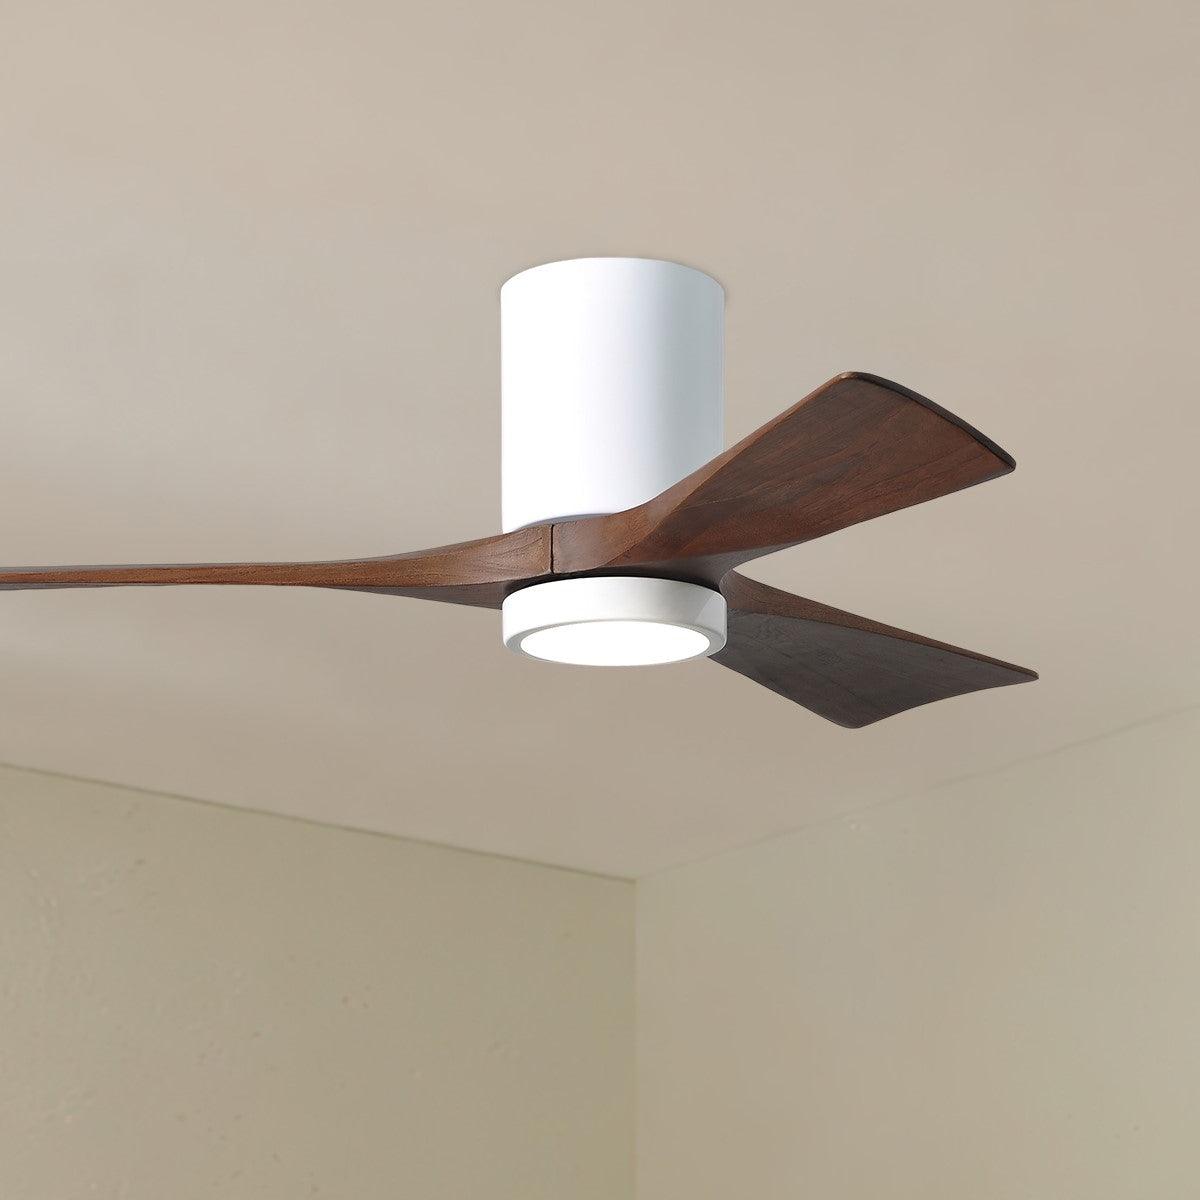 Irene 42 Inch Low Profile Outdoor Ceiling Fan With Light, Wall And Remote Control Included - Bees Lighting